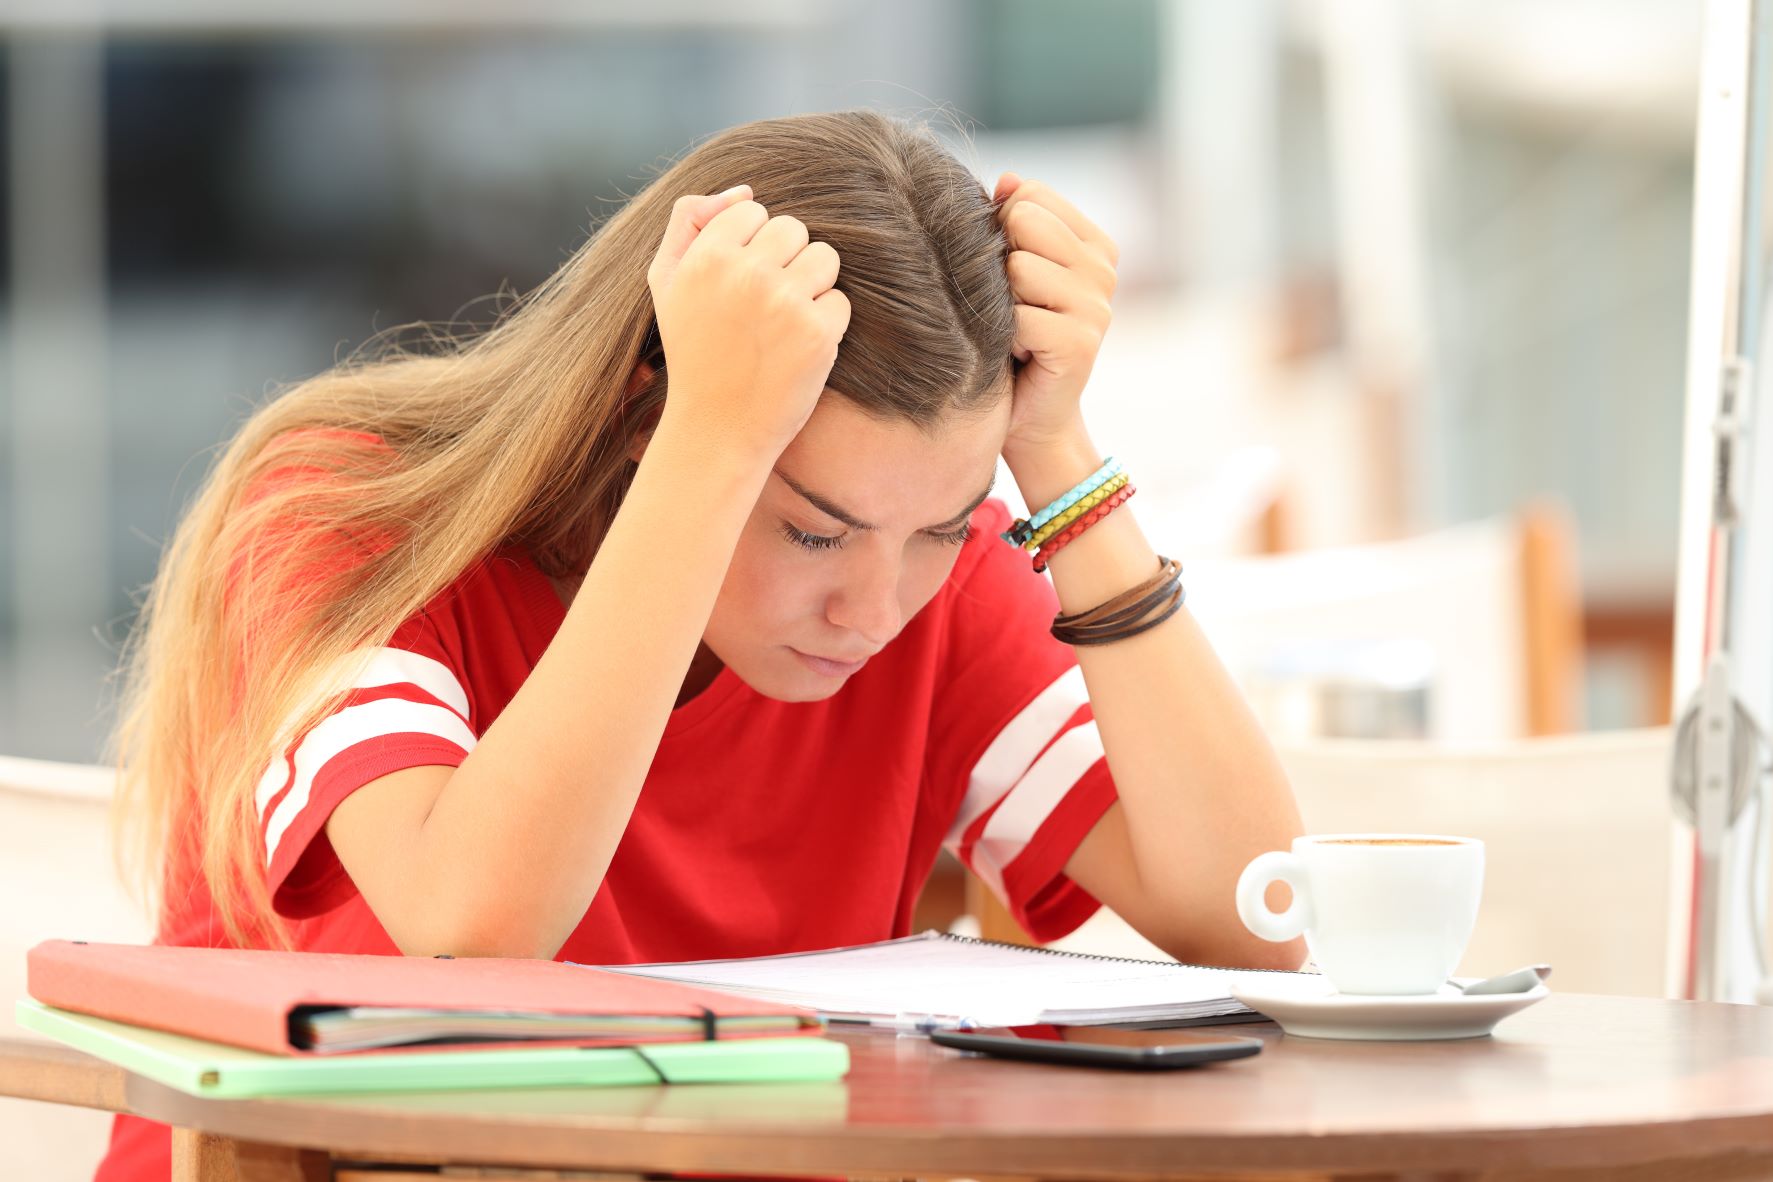 Senior-Year Stress: Here’s What Students Say and Do About It